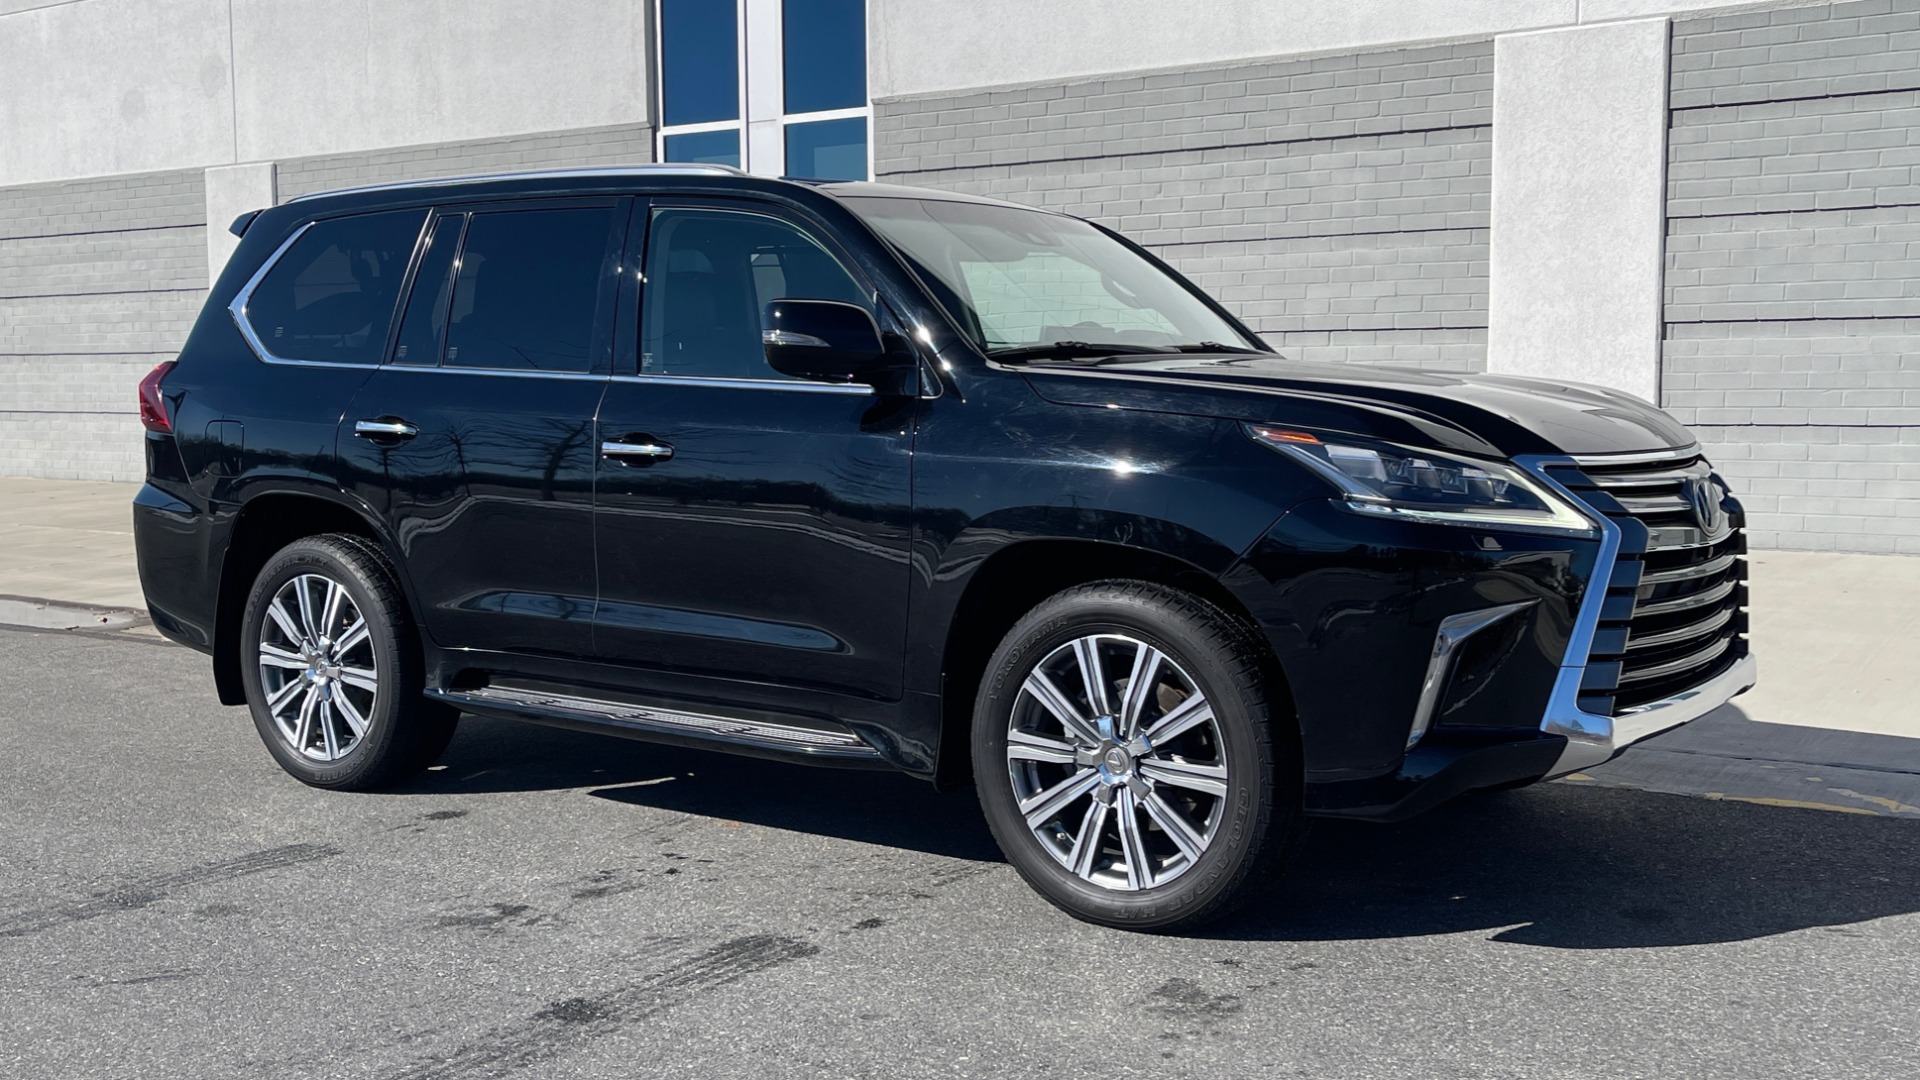 Used 2016 Lexus LX 570 4X4 / 5.7L / 5-DOOR SUV / LUX PKG / DVD ENT / COOL BOX / WIRELESS CHARGING for sale Sold at Formula Imports in Charlotte NC 28227 5